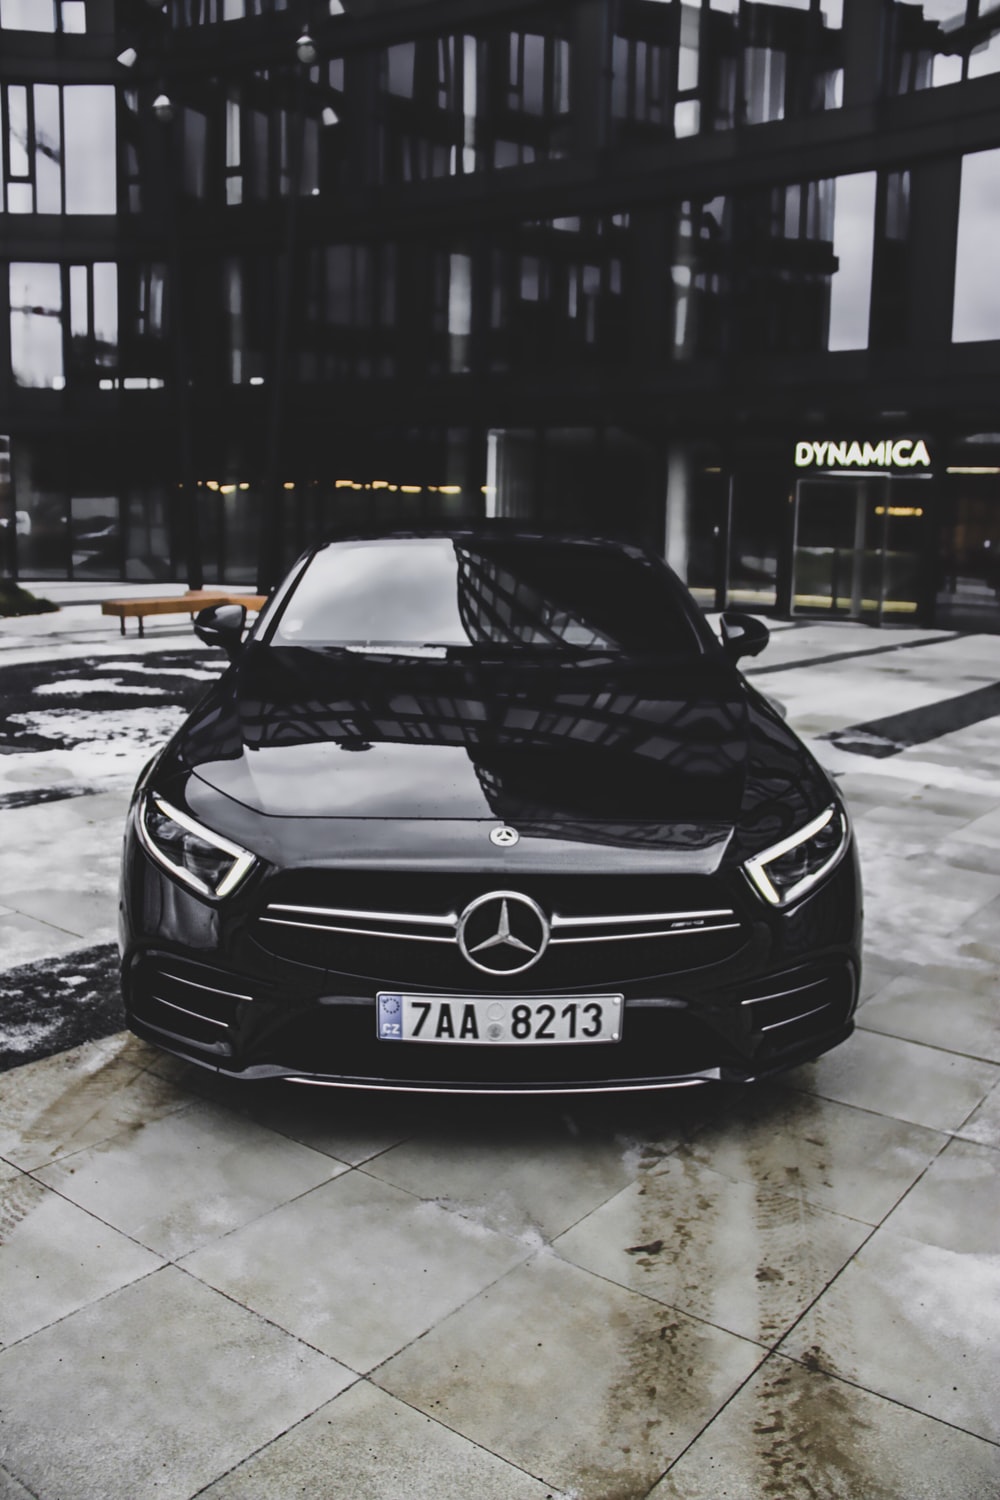 Black Mercedes Benz Vehicle Parked Outside Dynamica Building Photo